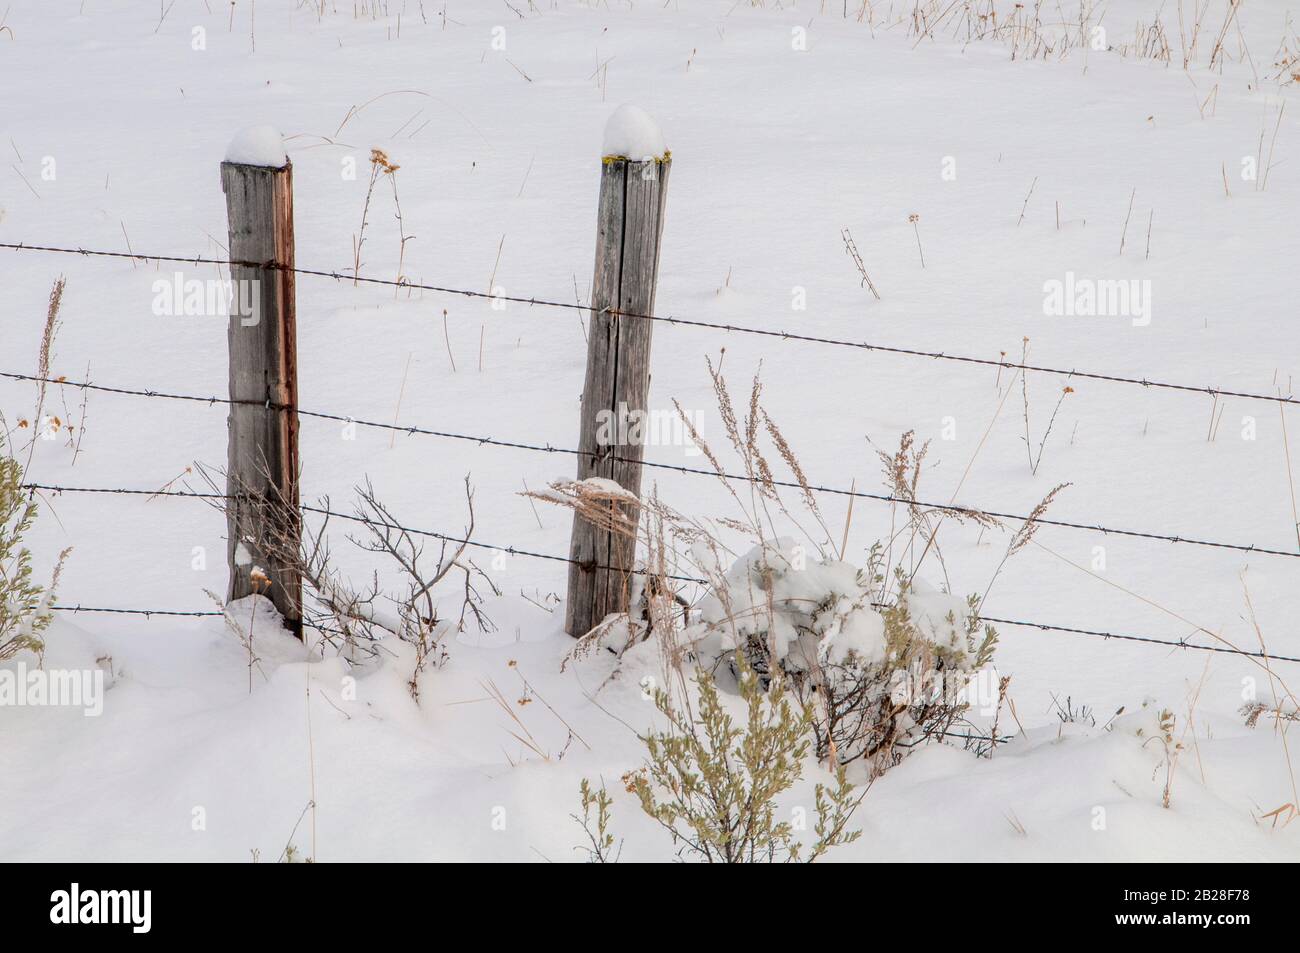 Two wooden post isolated along the 4 wire barbed wire fence standing in the snow with golden foliage. Stock Photo